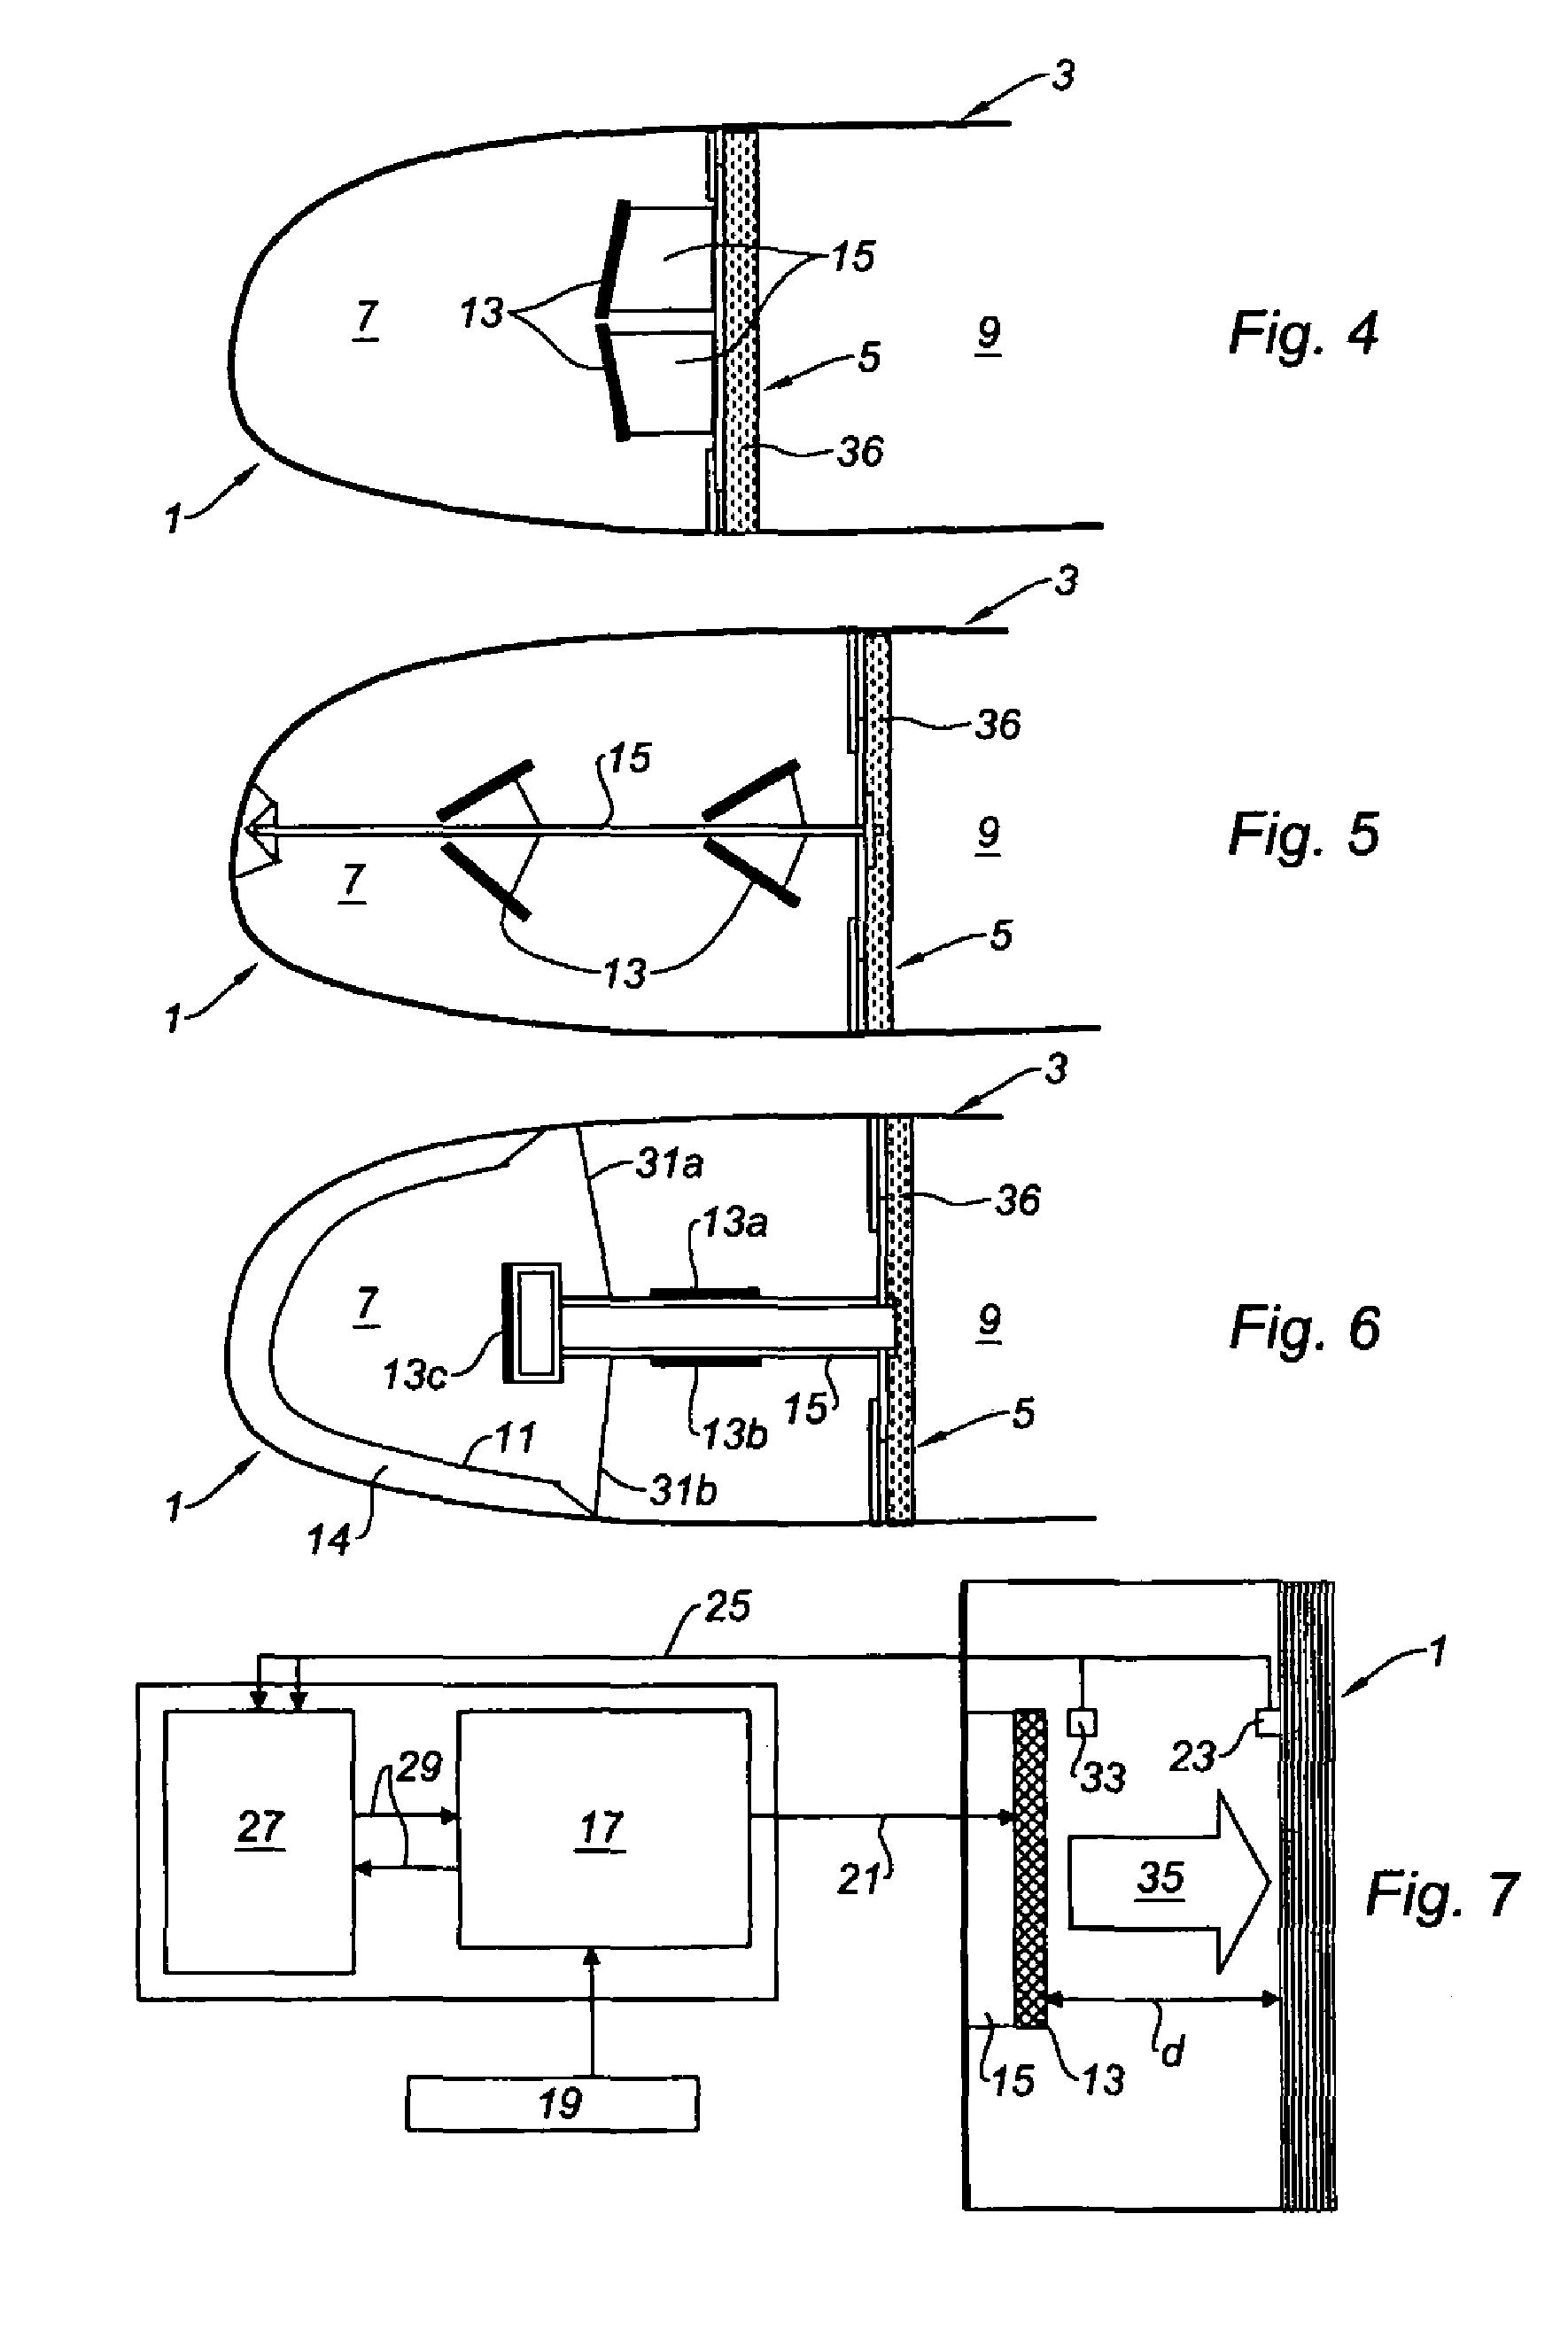 De-icing and/or Anti-icing system for the leading edge of an aircraft wing